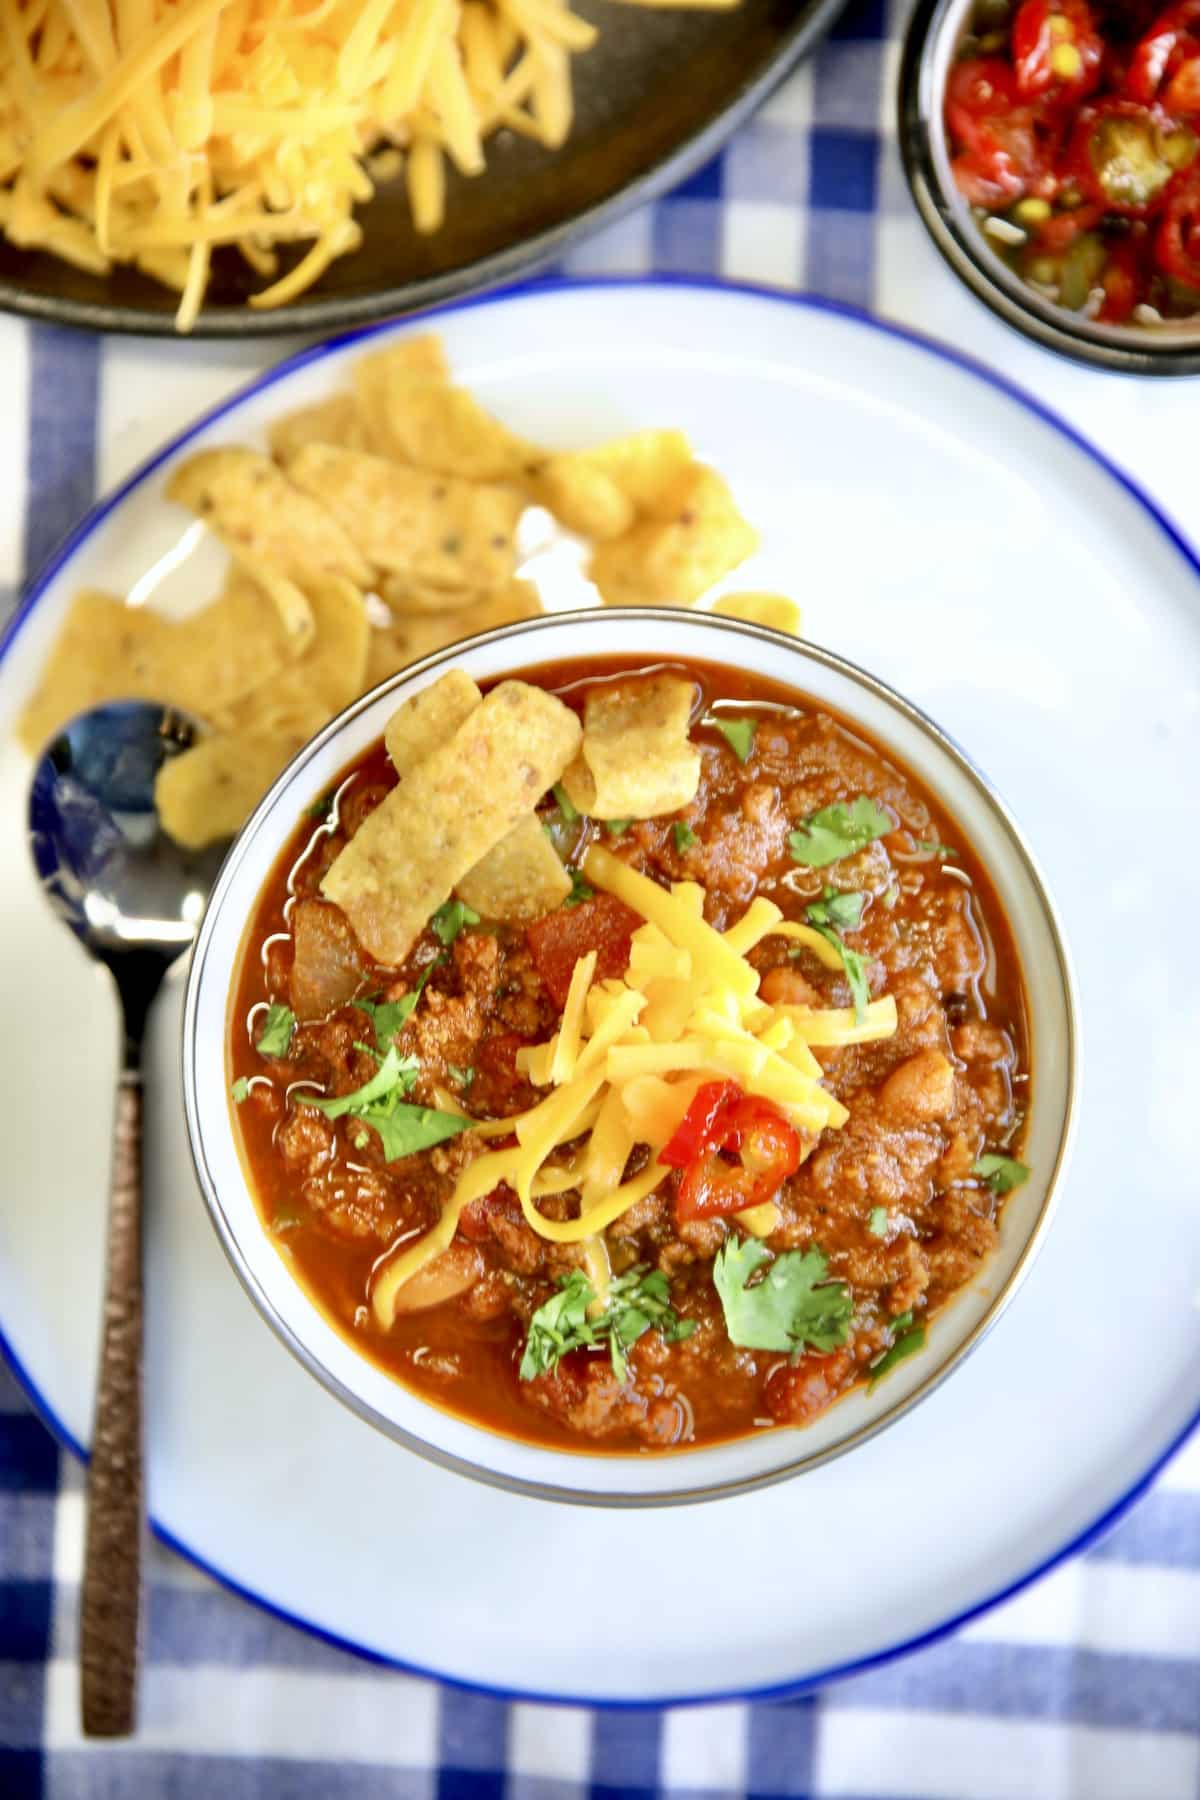 Bowl of chili with cheese.